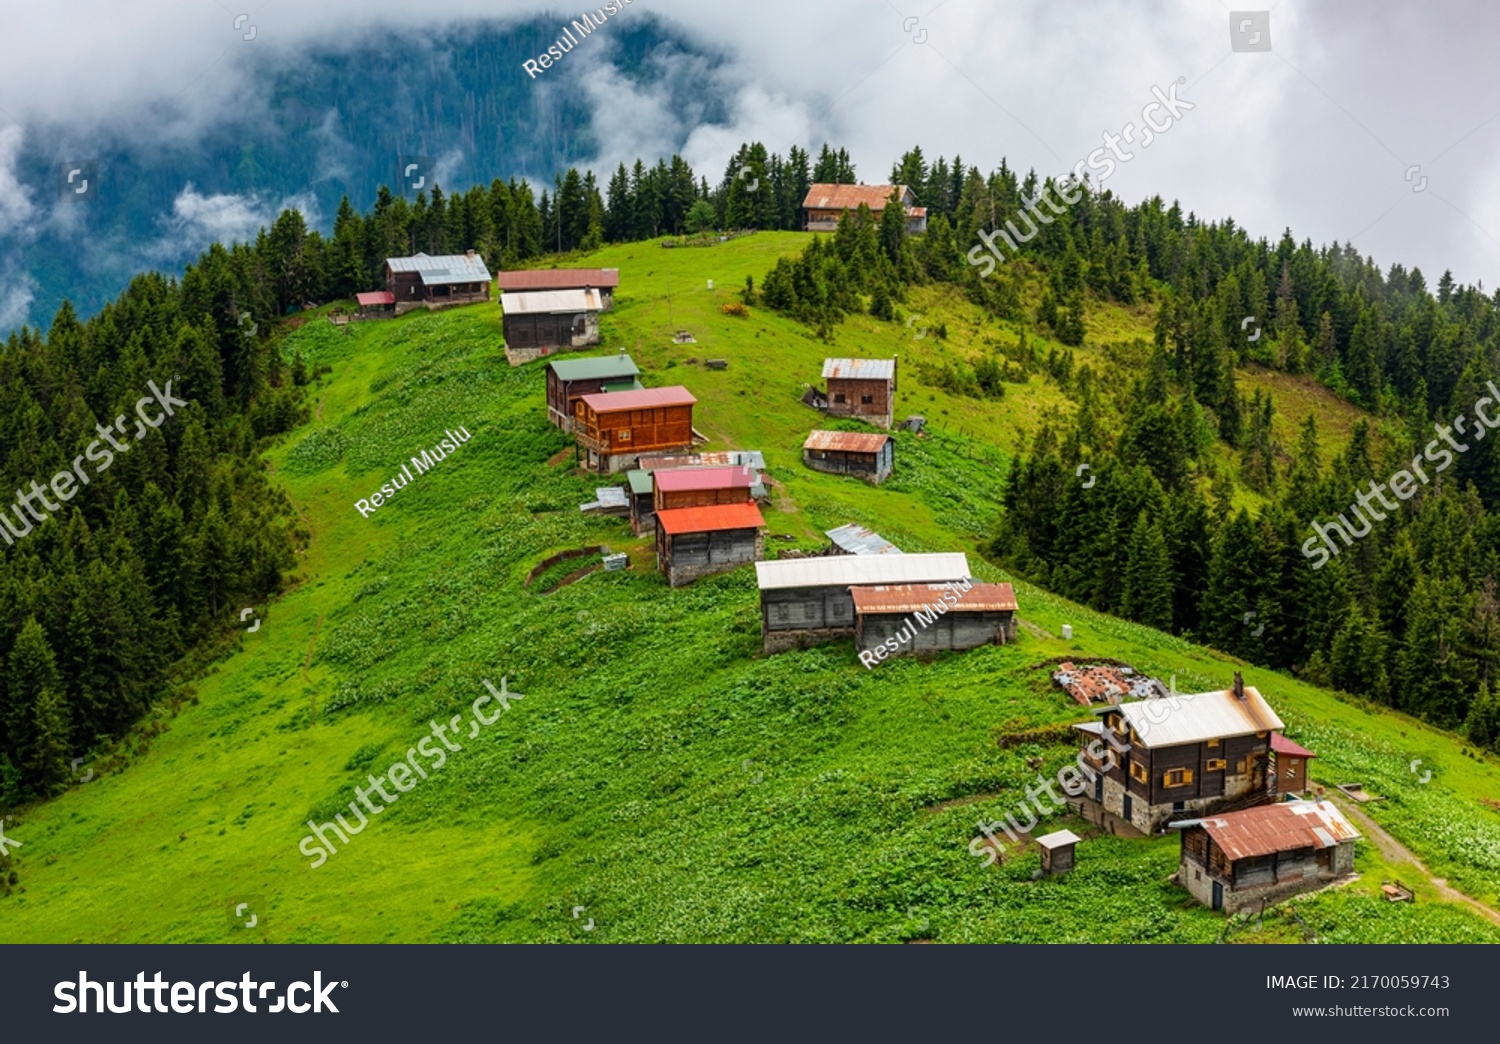 POKUT PLATEAU view with Kackar Mountains. This plateau located in Camlihemsin district of Rize province. Kackar Mountains region. Rize, Turkey. #2170059743